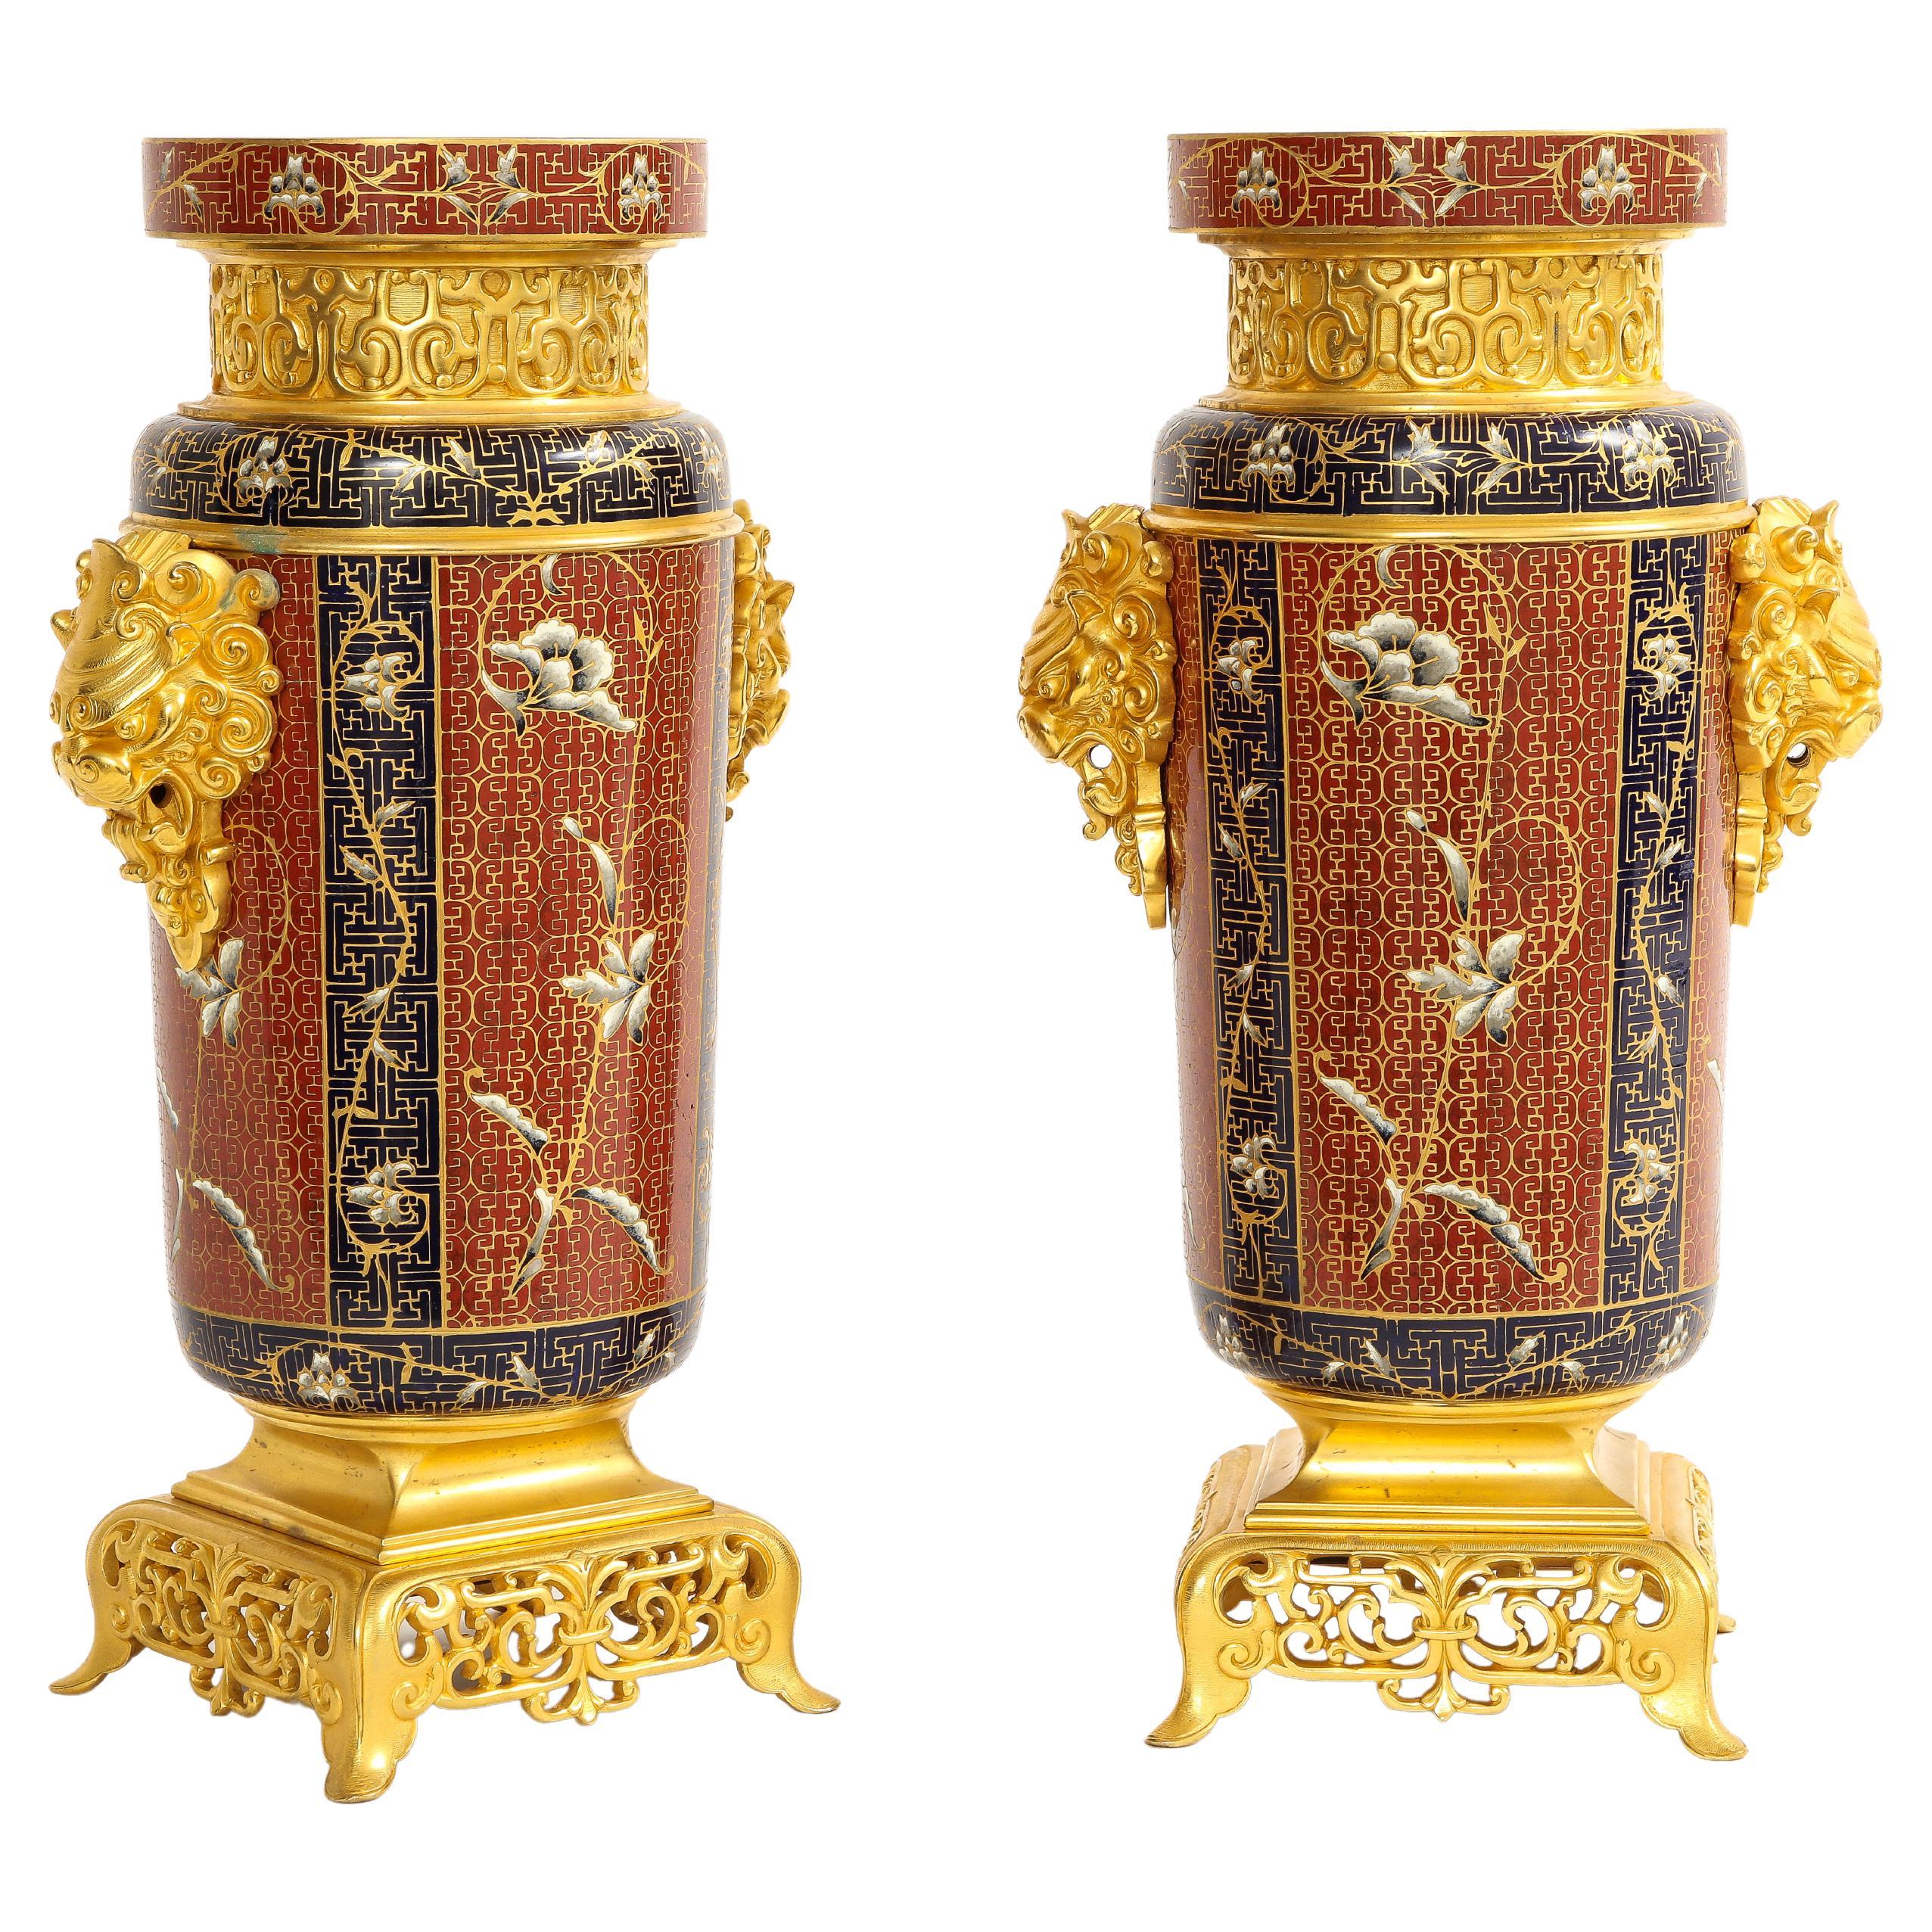 Pair of 19th C. French Ormolu and Champleve Enamel Vases with Foo Lion Handles